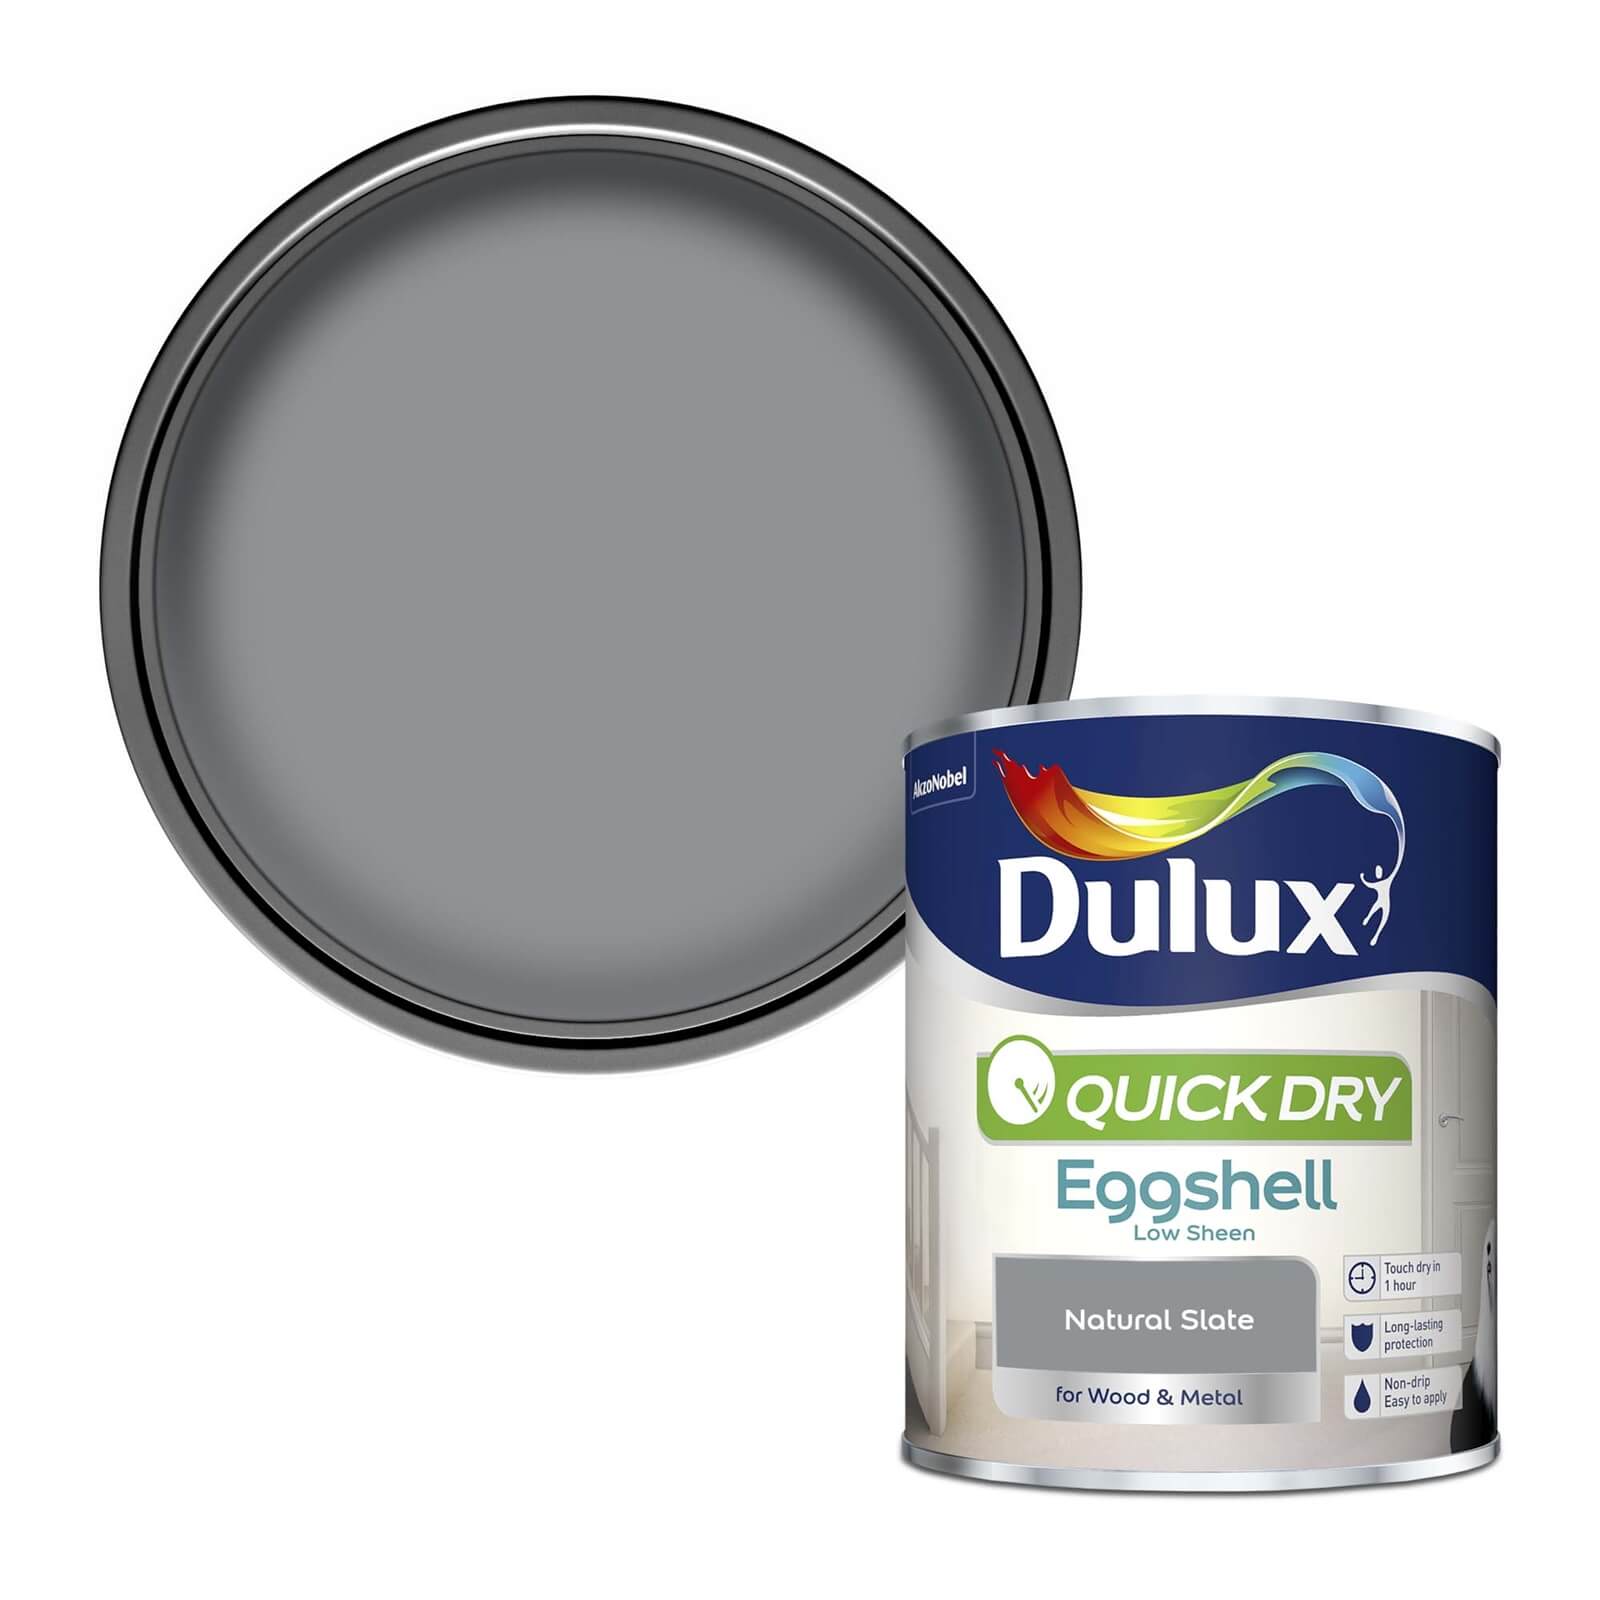 Dulux Quick Dry Eggshell Paint Natural Slate - 750ml